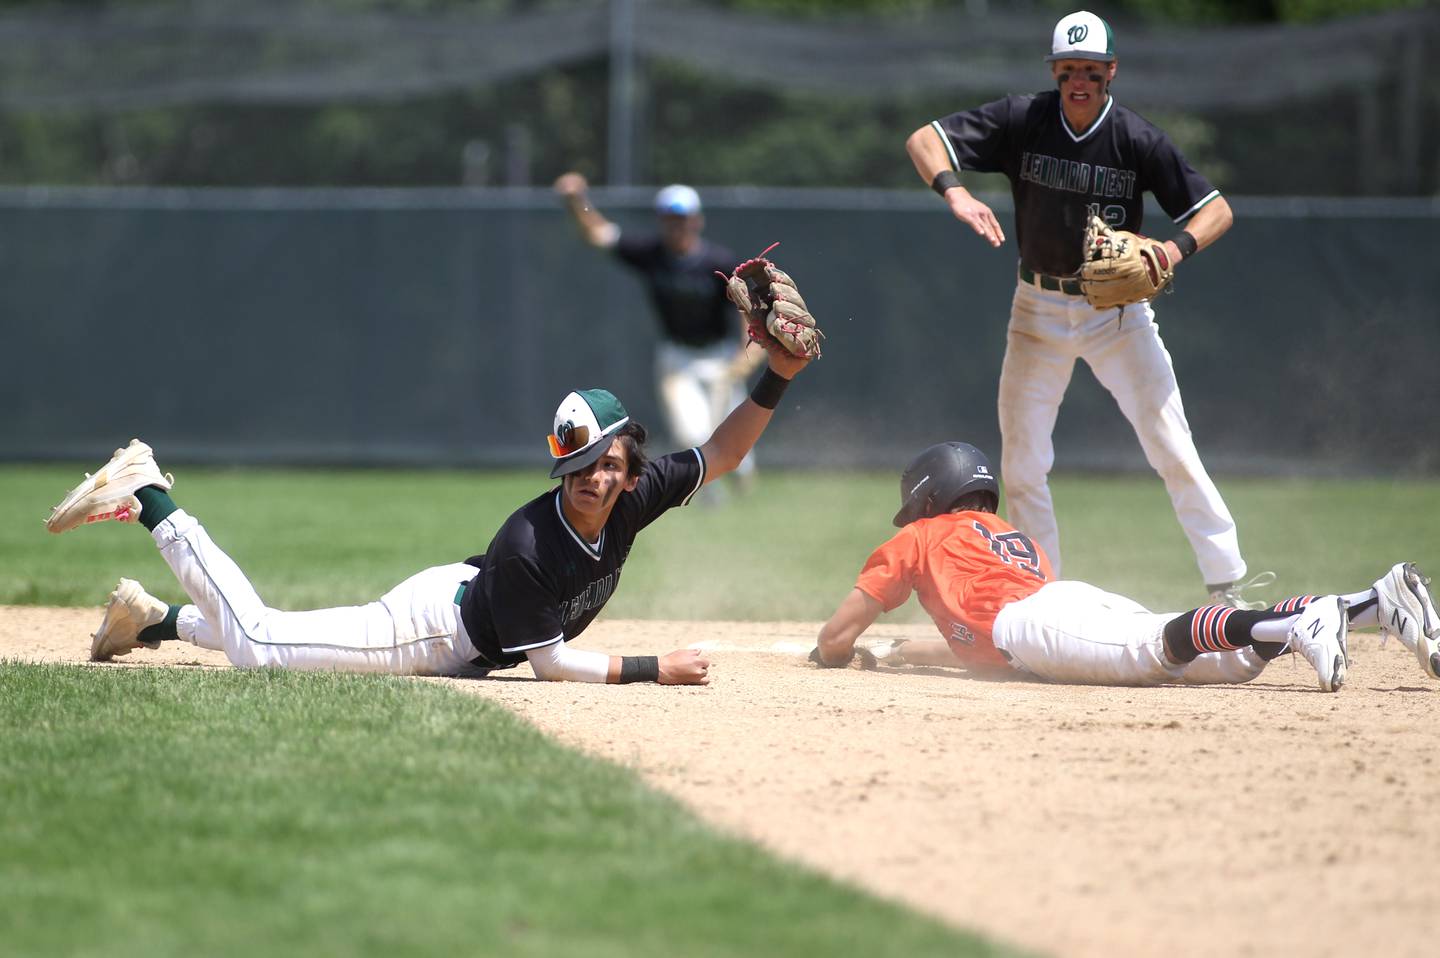 Glenbard West’s Jason Valdez gets St. Chalrs East’s Clay Jensen out at second base during the Class 4A Glenbard West Regional final in Glen Ellyn on Saturday, May 28, 2022.